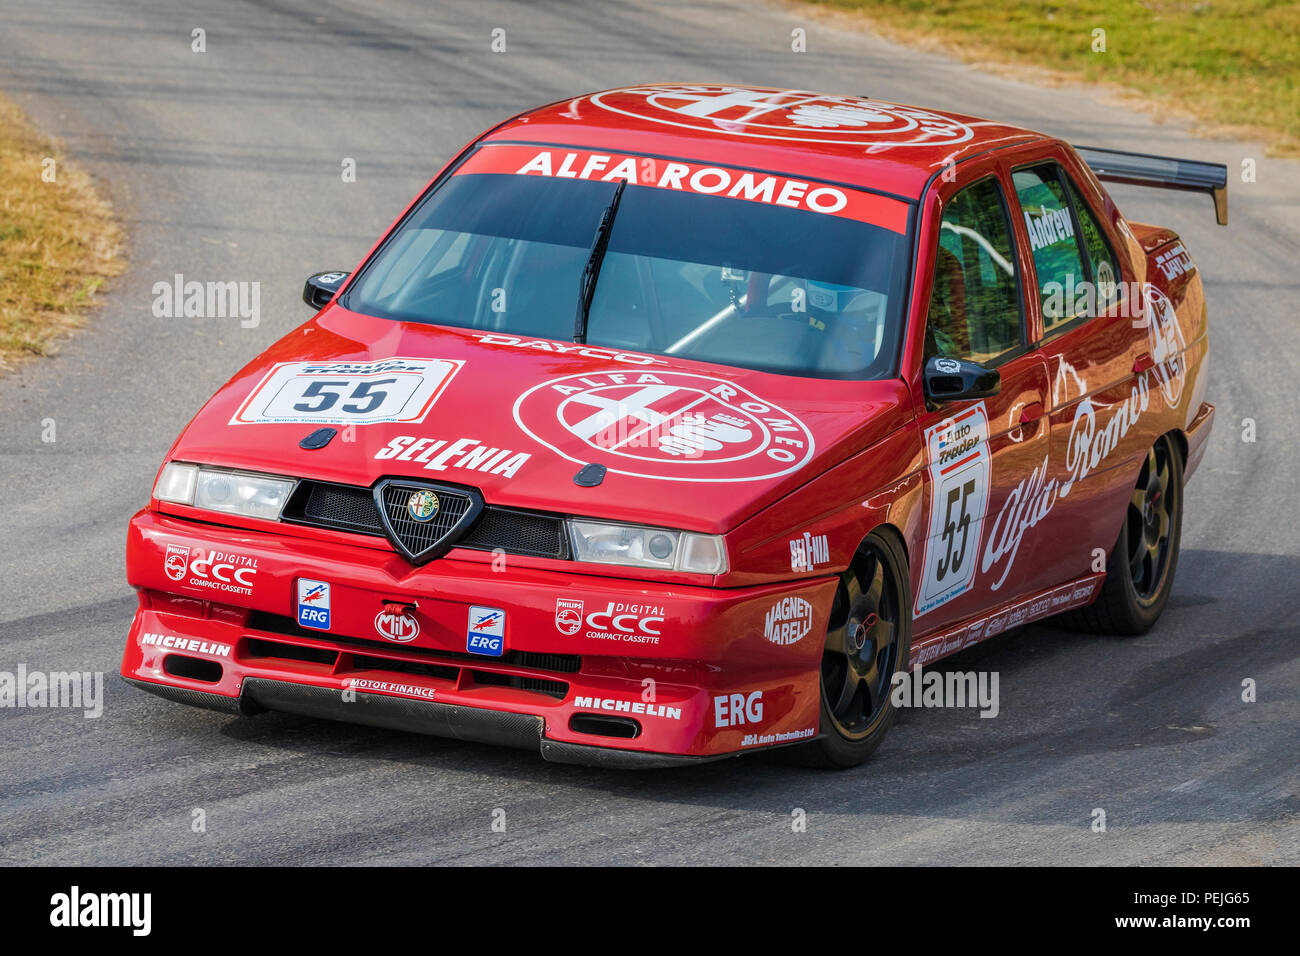 1994 Alfa Romeo 155, originally driven by Gabrieli Tarquini, here driven by Tom Andrew at the 2018 Goodwood Festival of Speed, Sussex, UK. Stock Photo